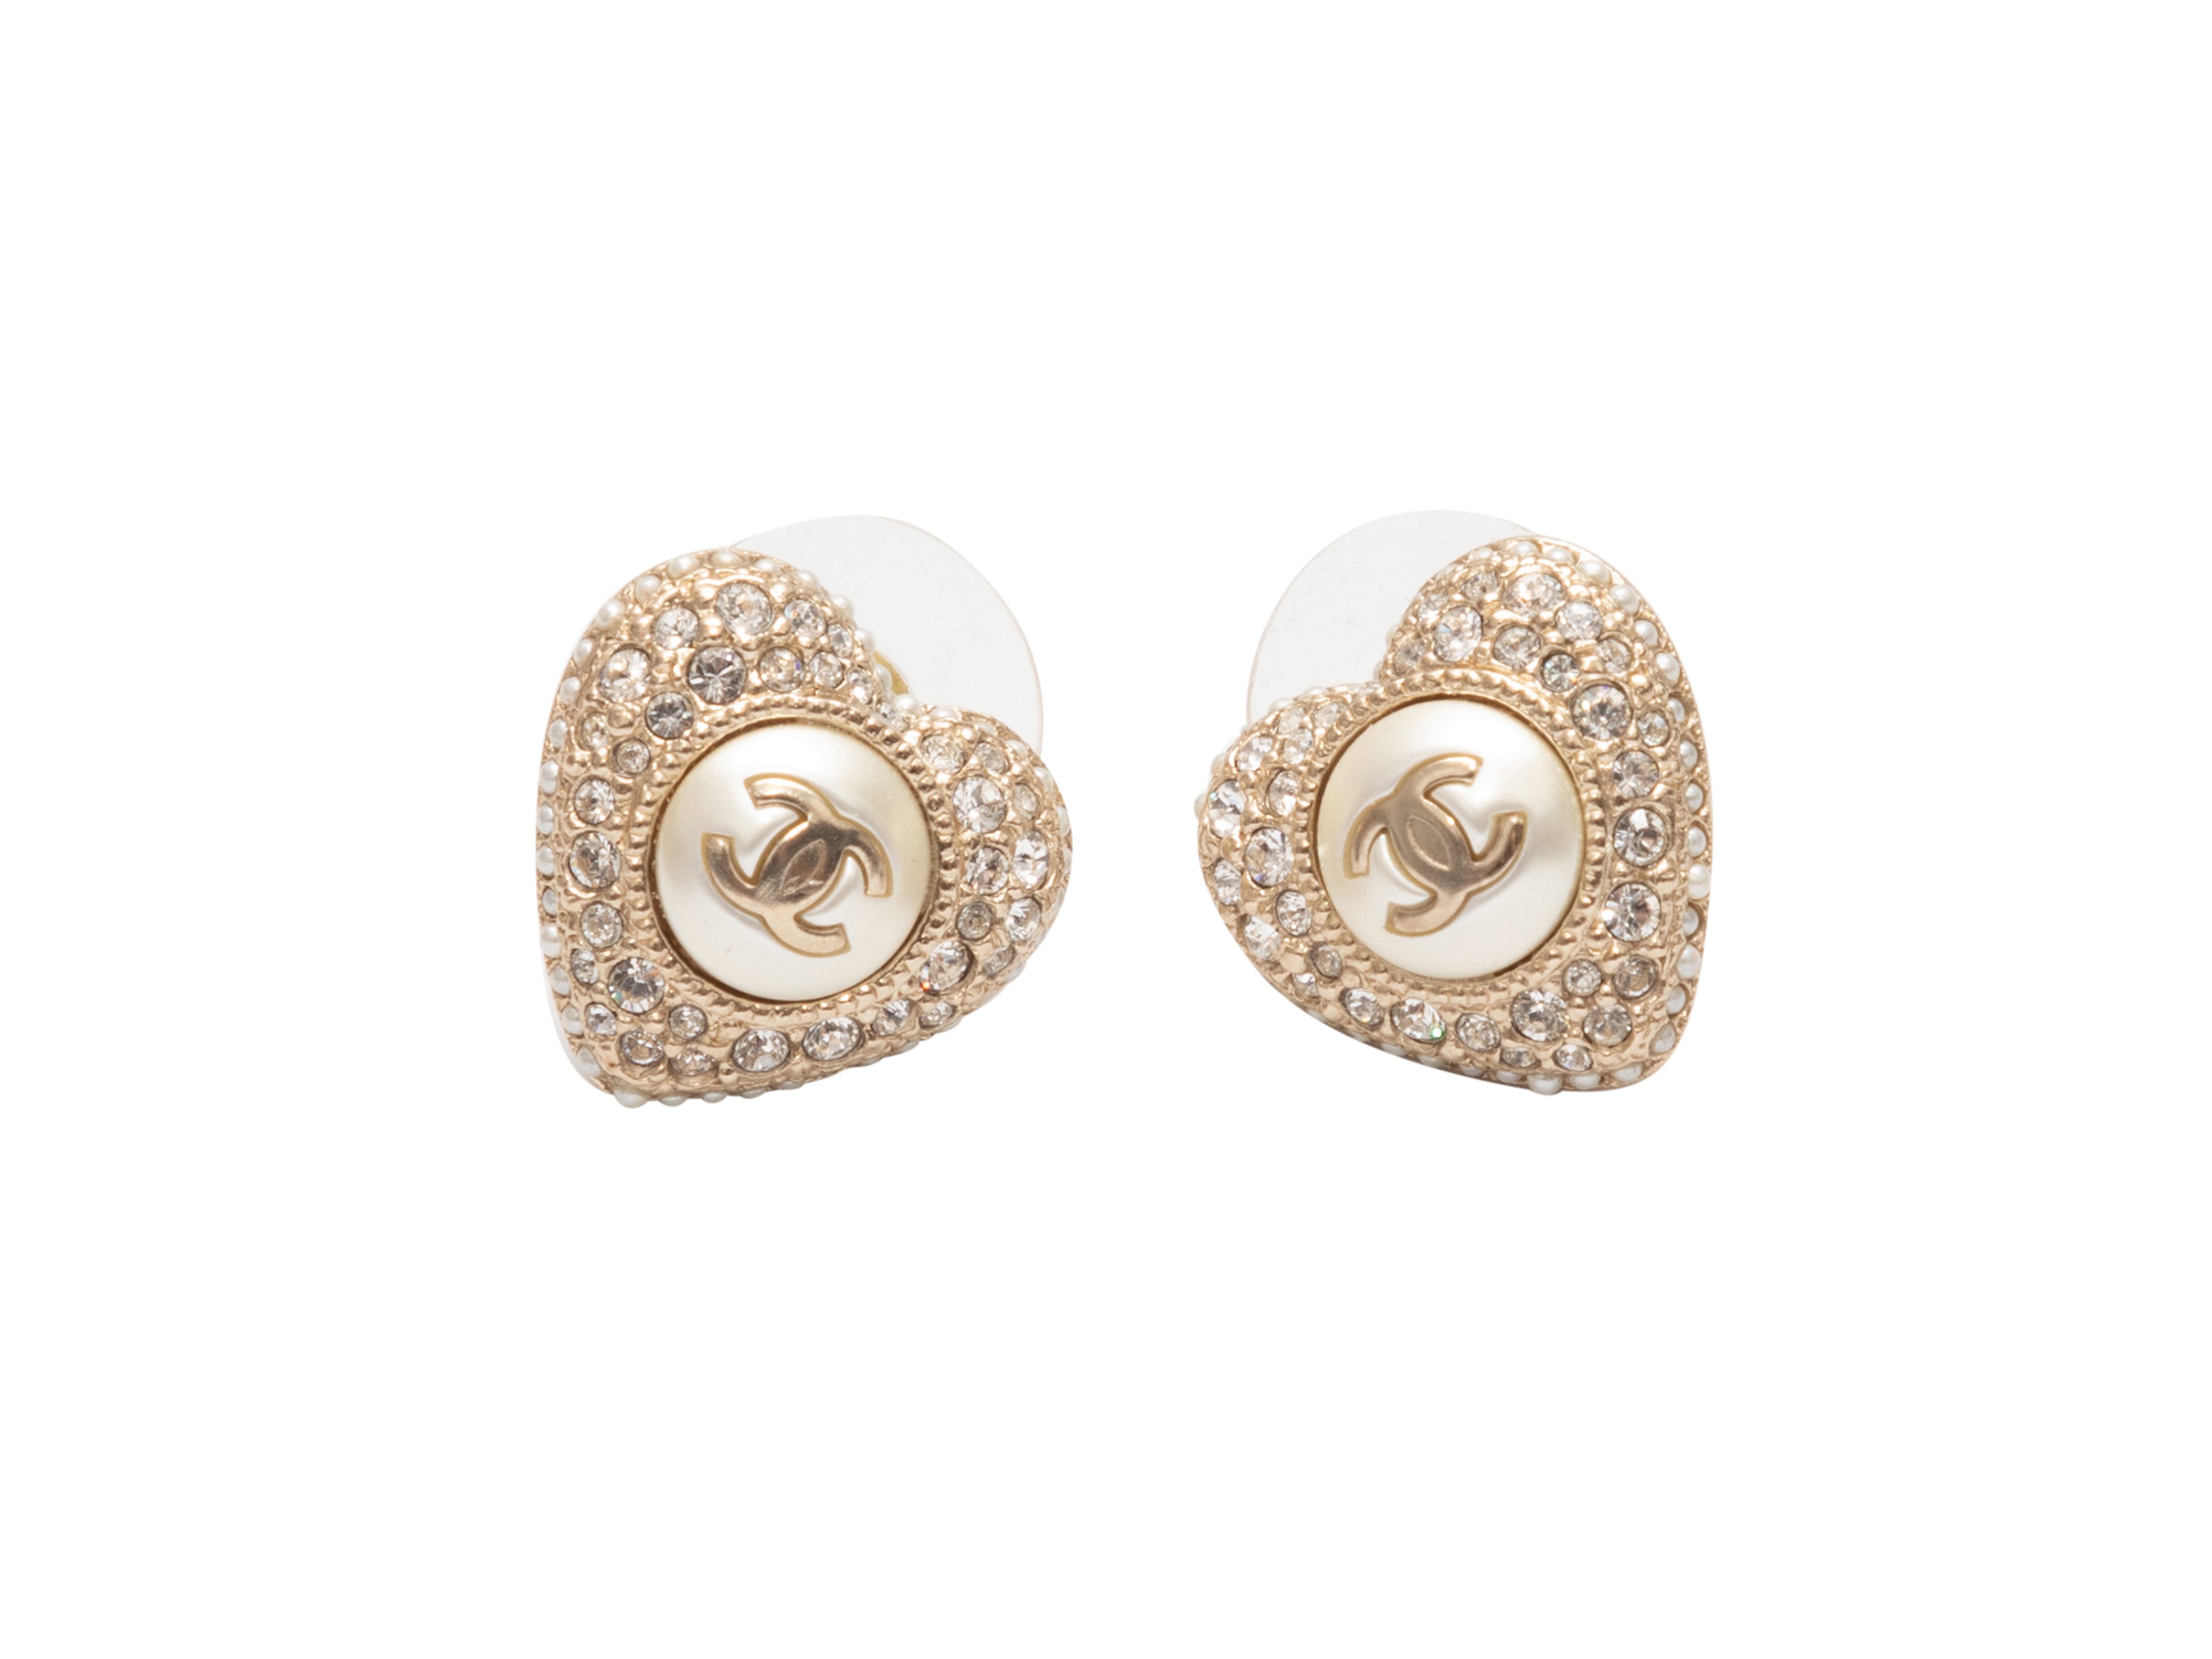 CHANEL NEW IN BOX CC GOLD TONE W/SILVER CRYSTAL PAVE STUD EARRINGS